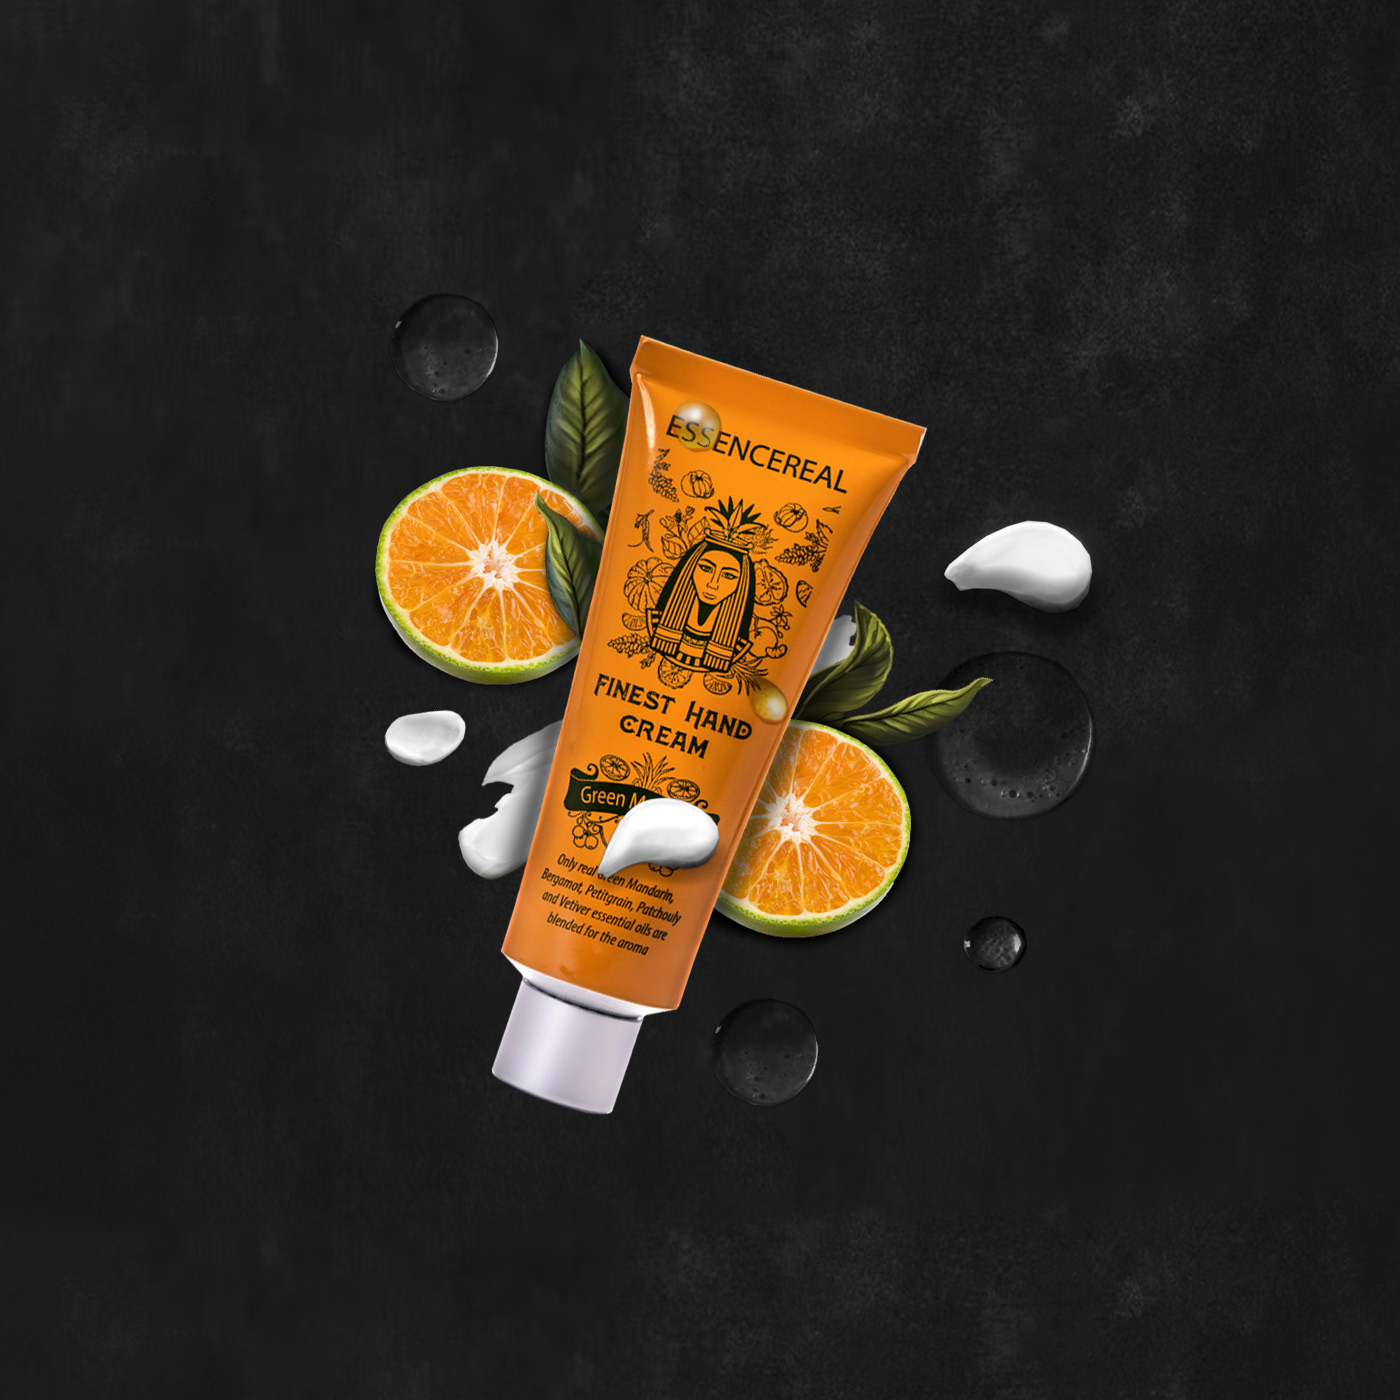 cosmetics hand cream beauty Packaging Lable skincare makeup Fruit